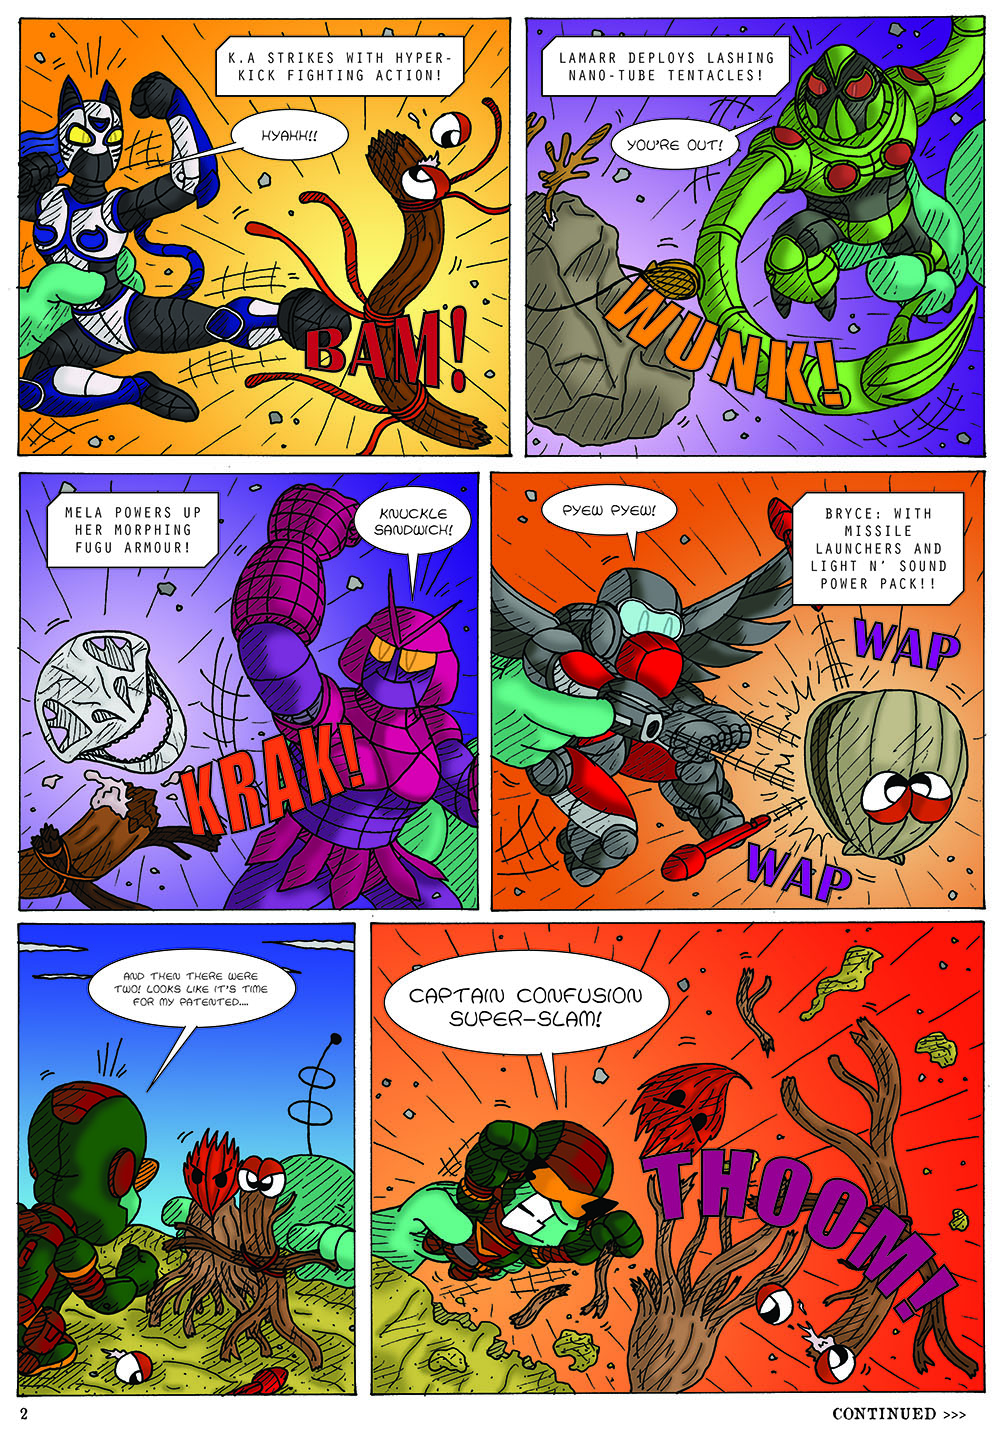 We Are The WyreCats by Cartoonist at Large (page 2 of 3)